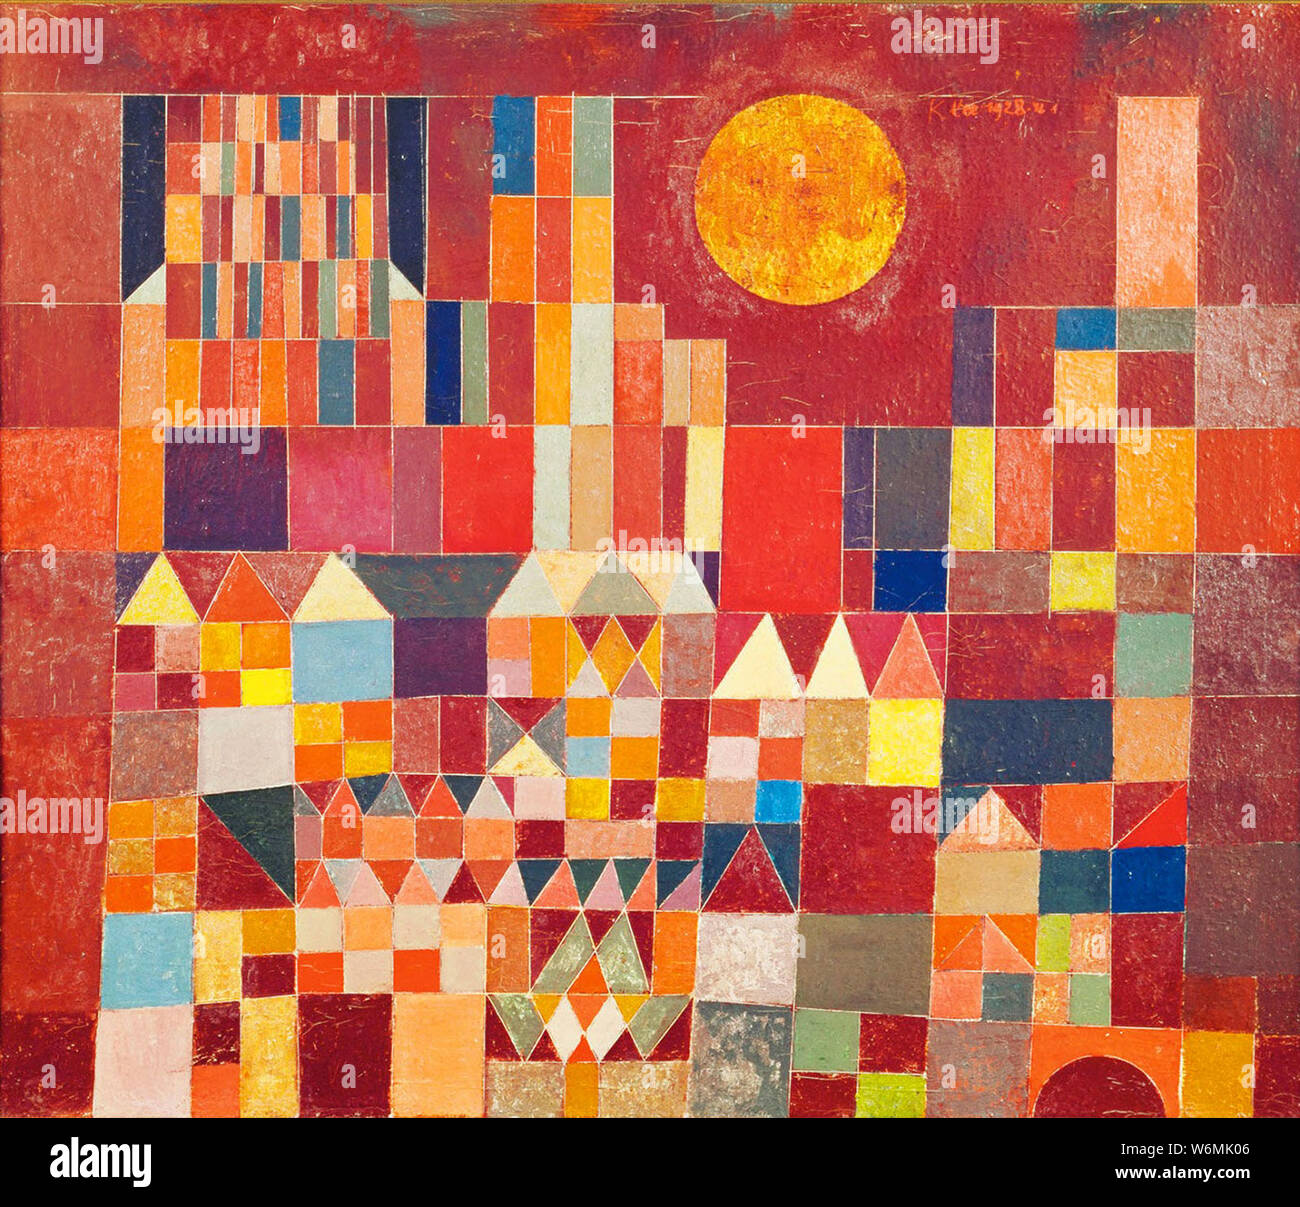 Paul Klee abstract painting ideal for interior decoration Stock Photo